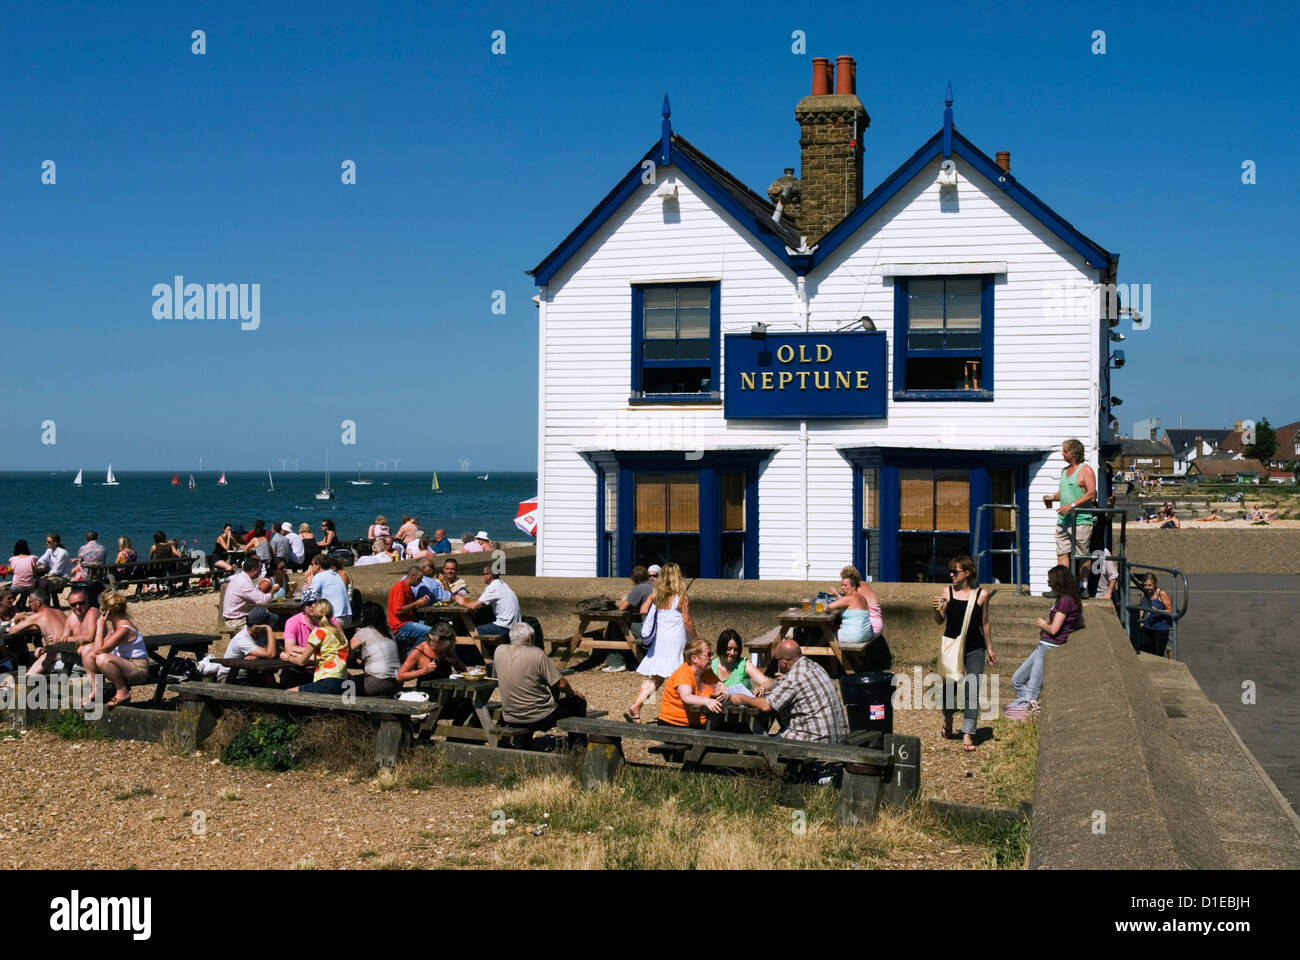 Neptune ancien pub, Whitstable, Kent, Angleterre, Royaume-Uni, Europe Banque D'Images